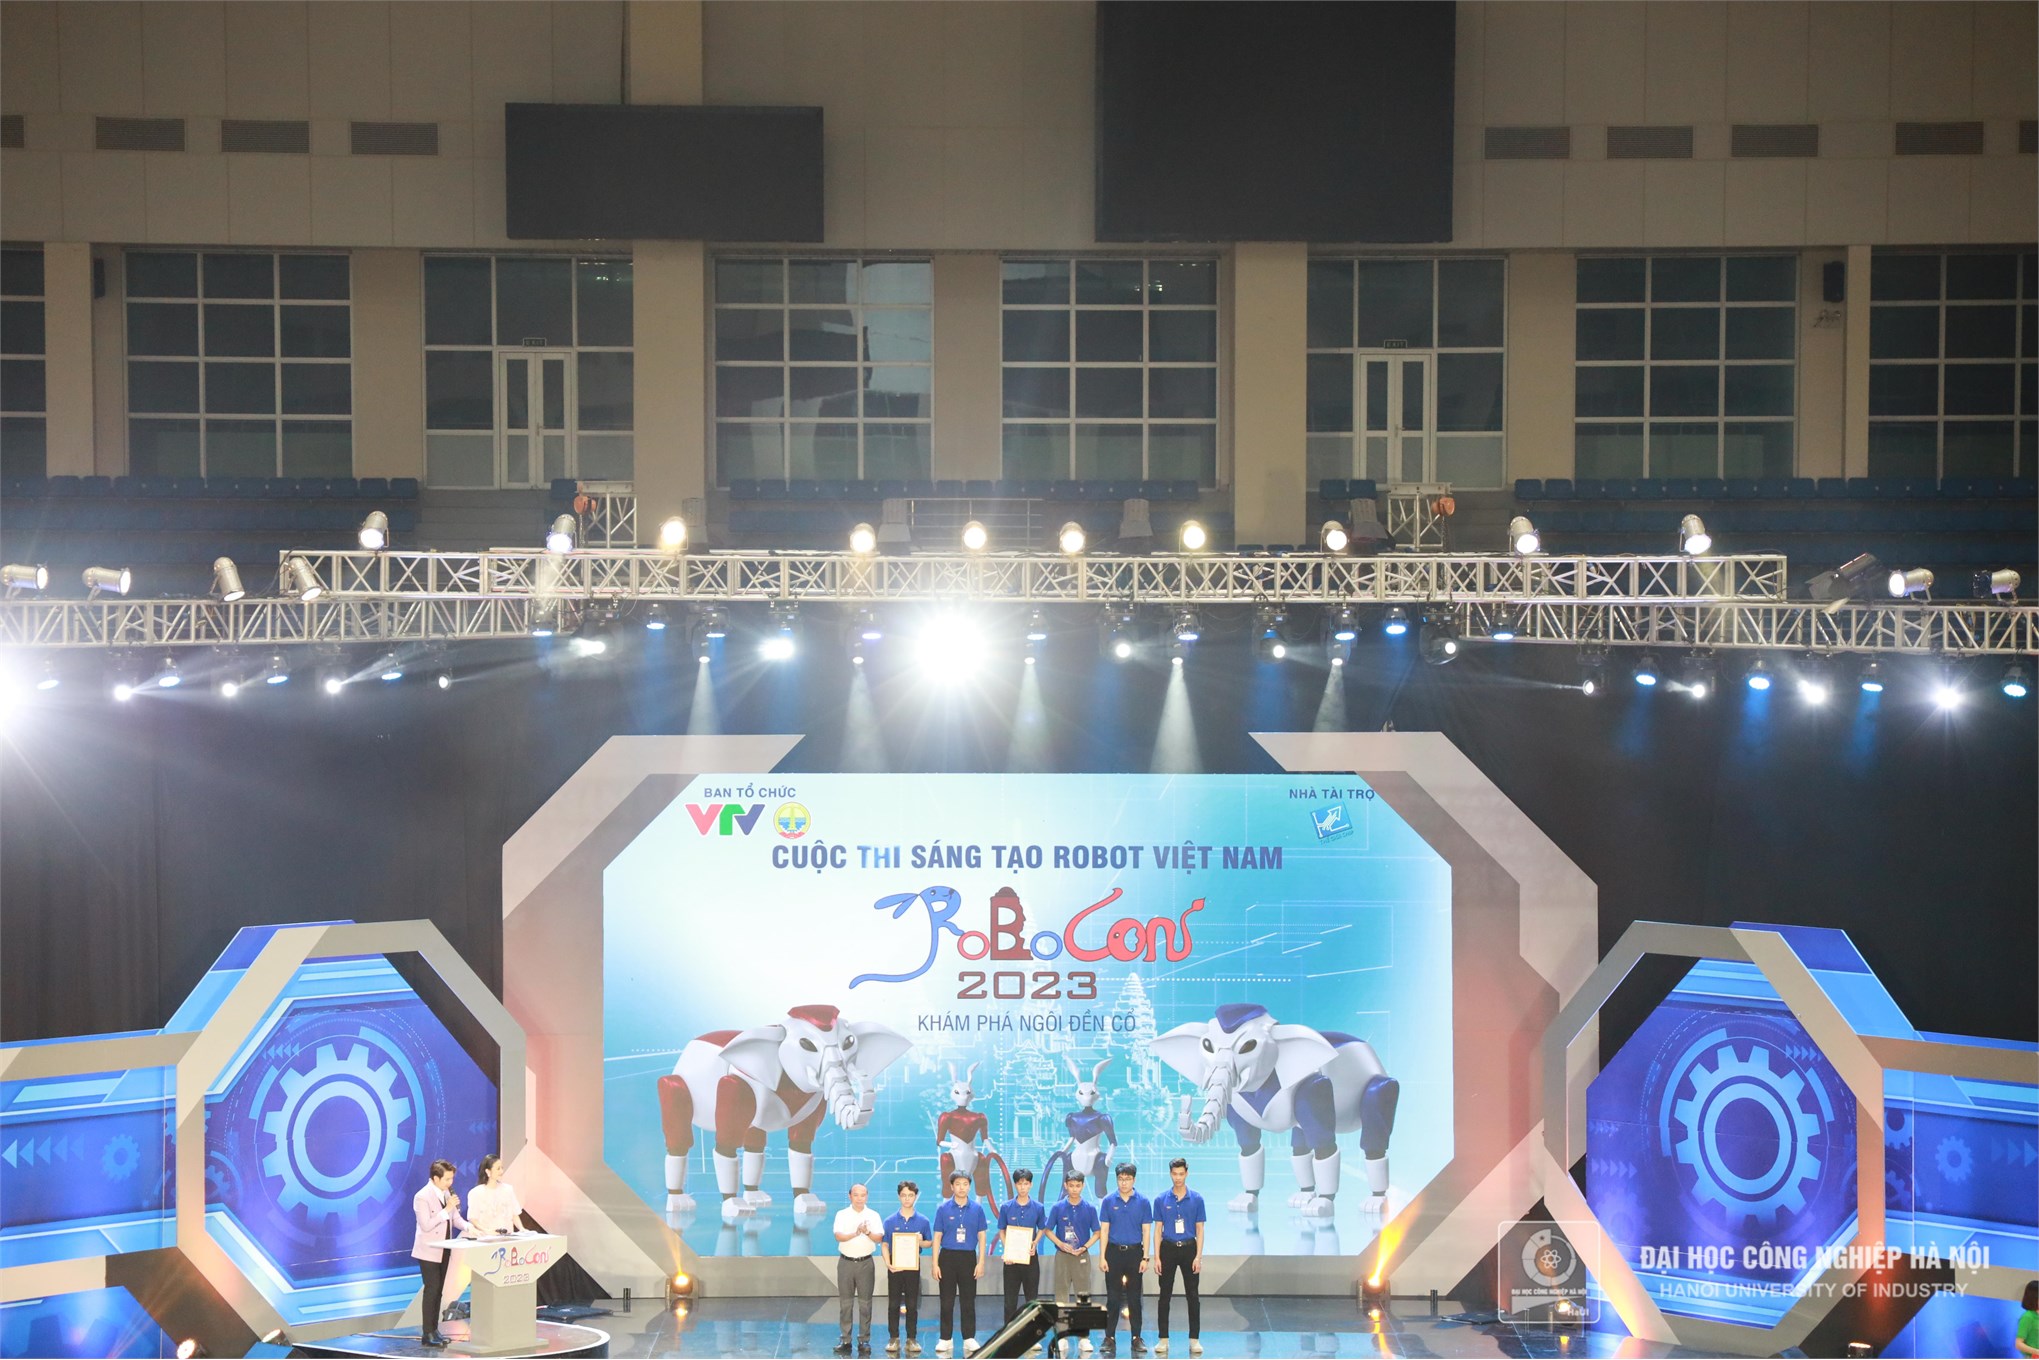 DCN - ĐT02 from Hanoi University of Industry becomes the champion of the Vietnam Robot Creation Contest 2023